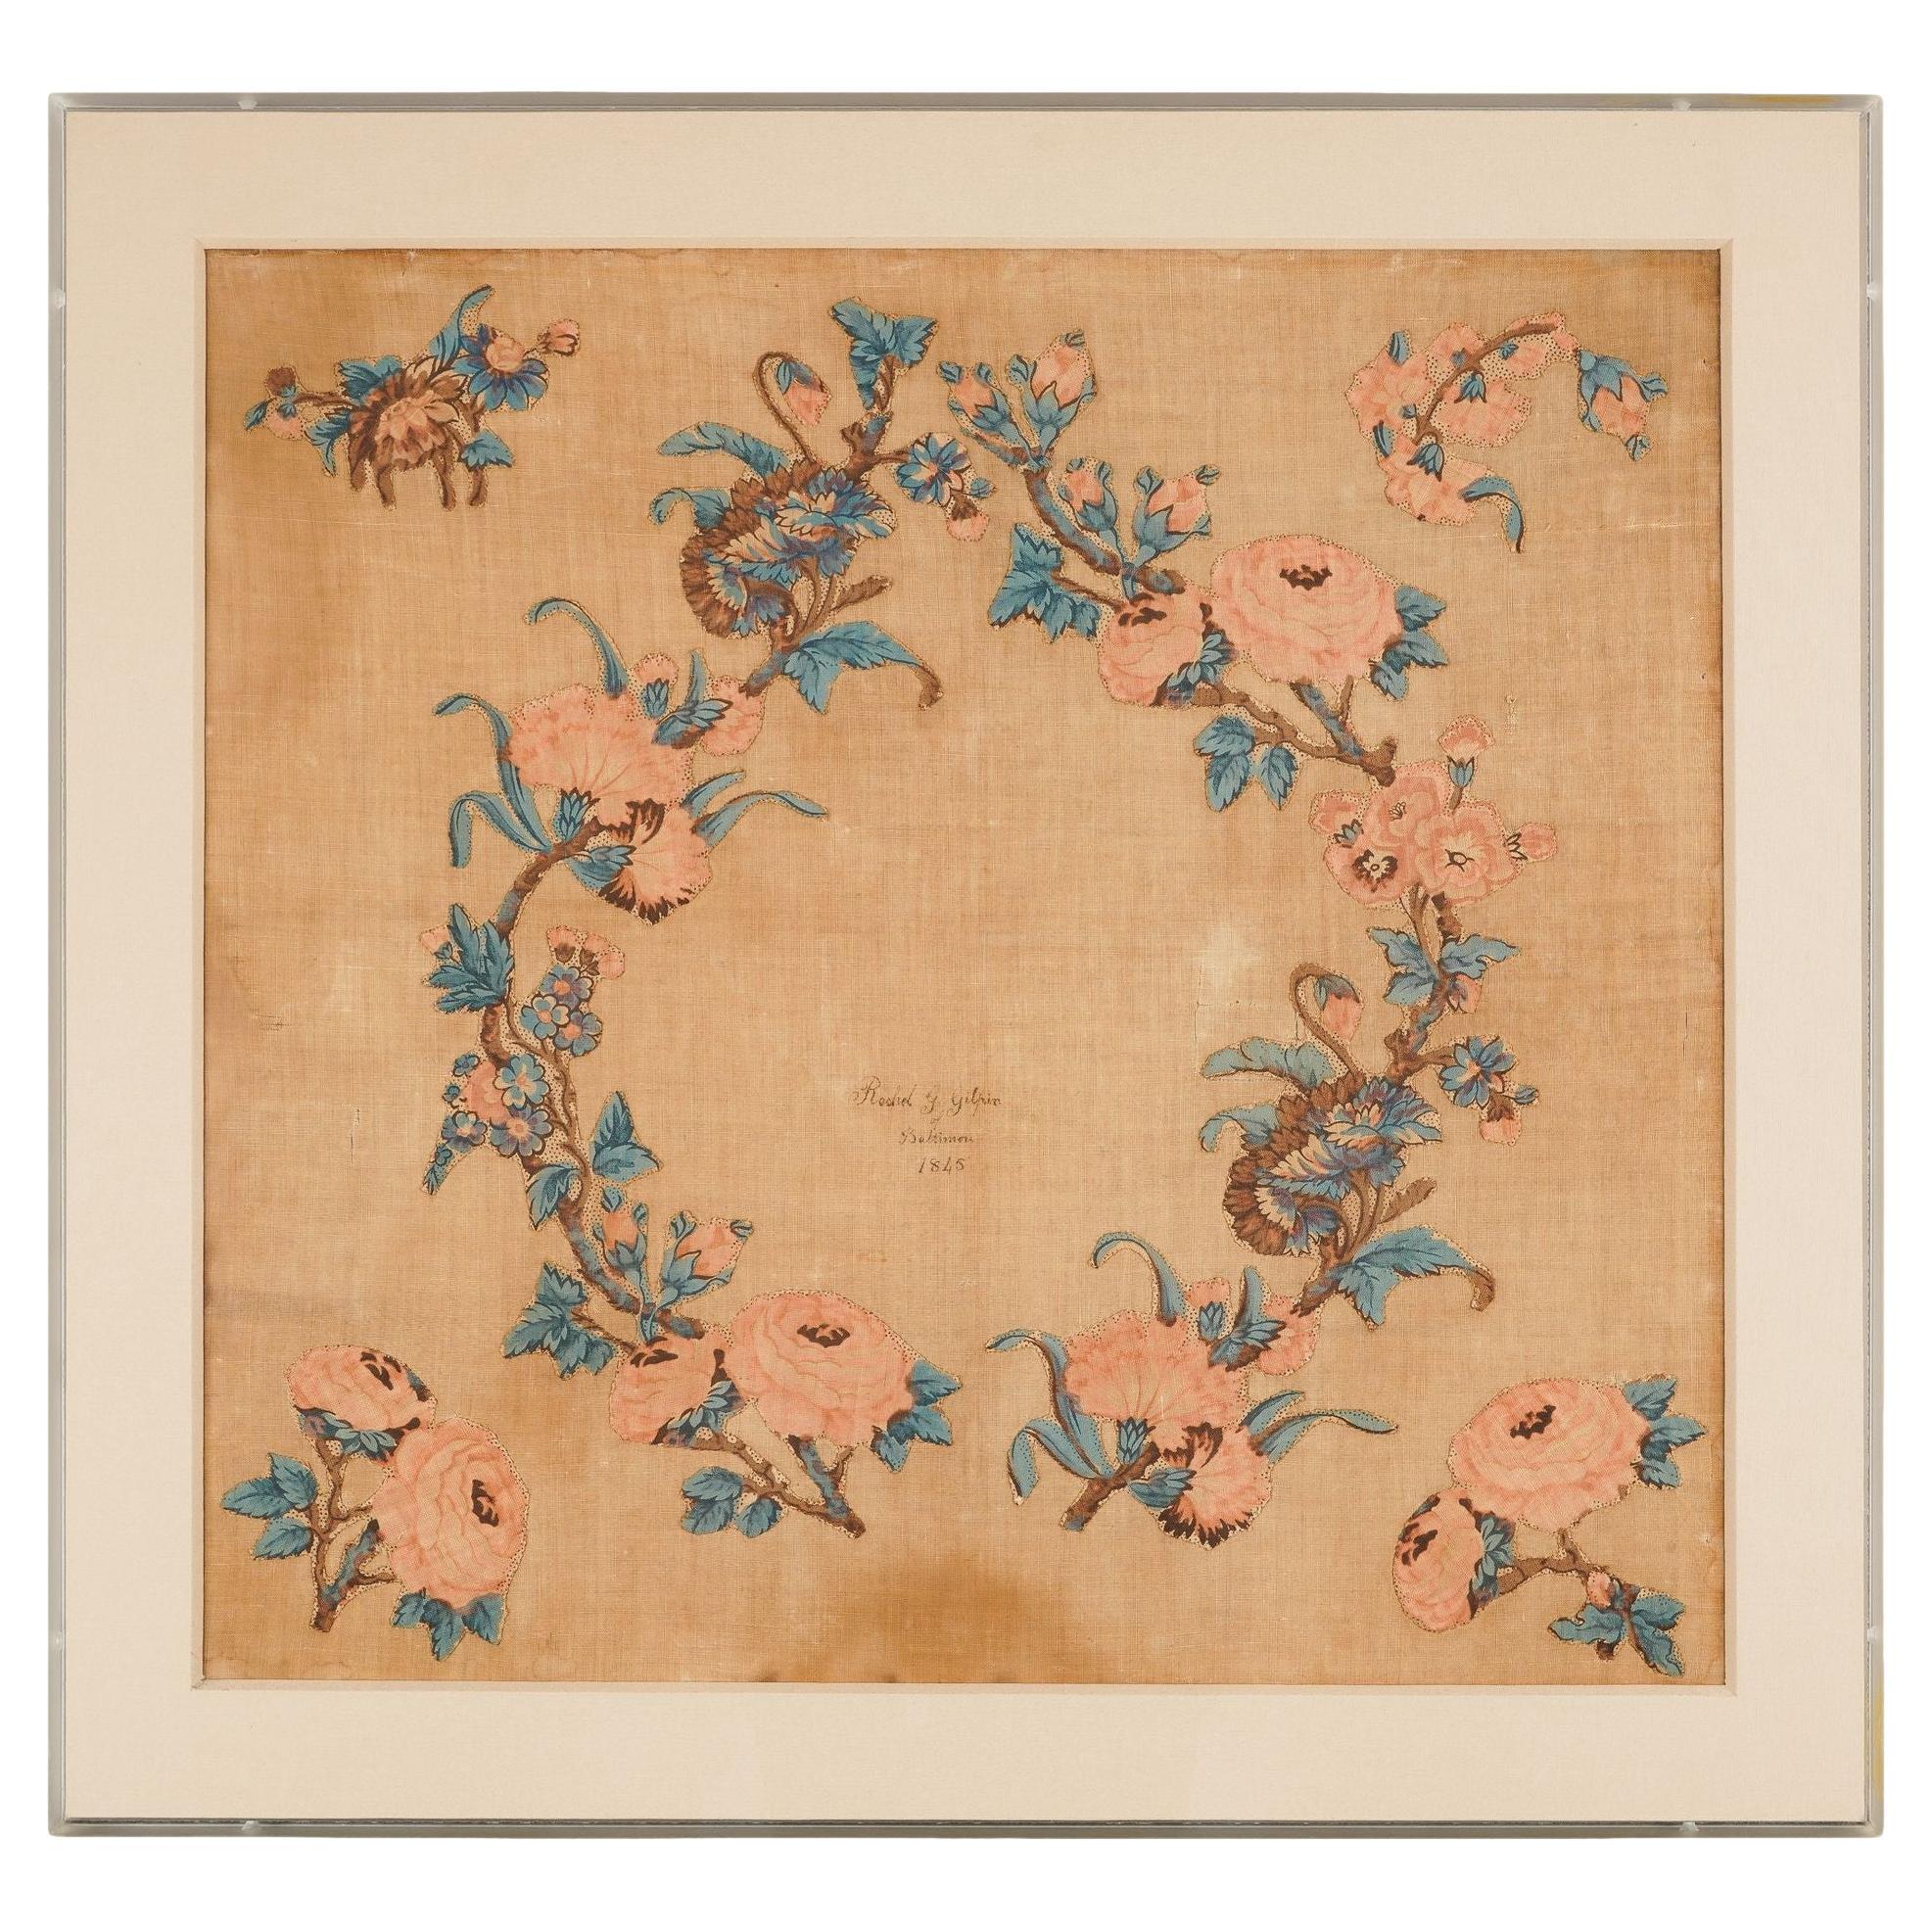 American appliqué quilt square by Rachel G Gilpin, 1845